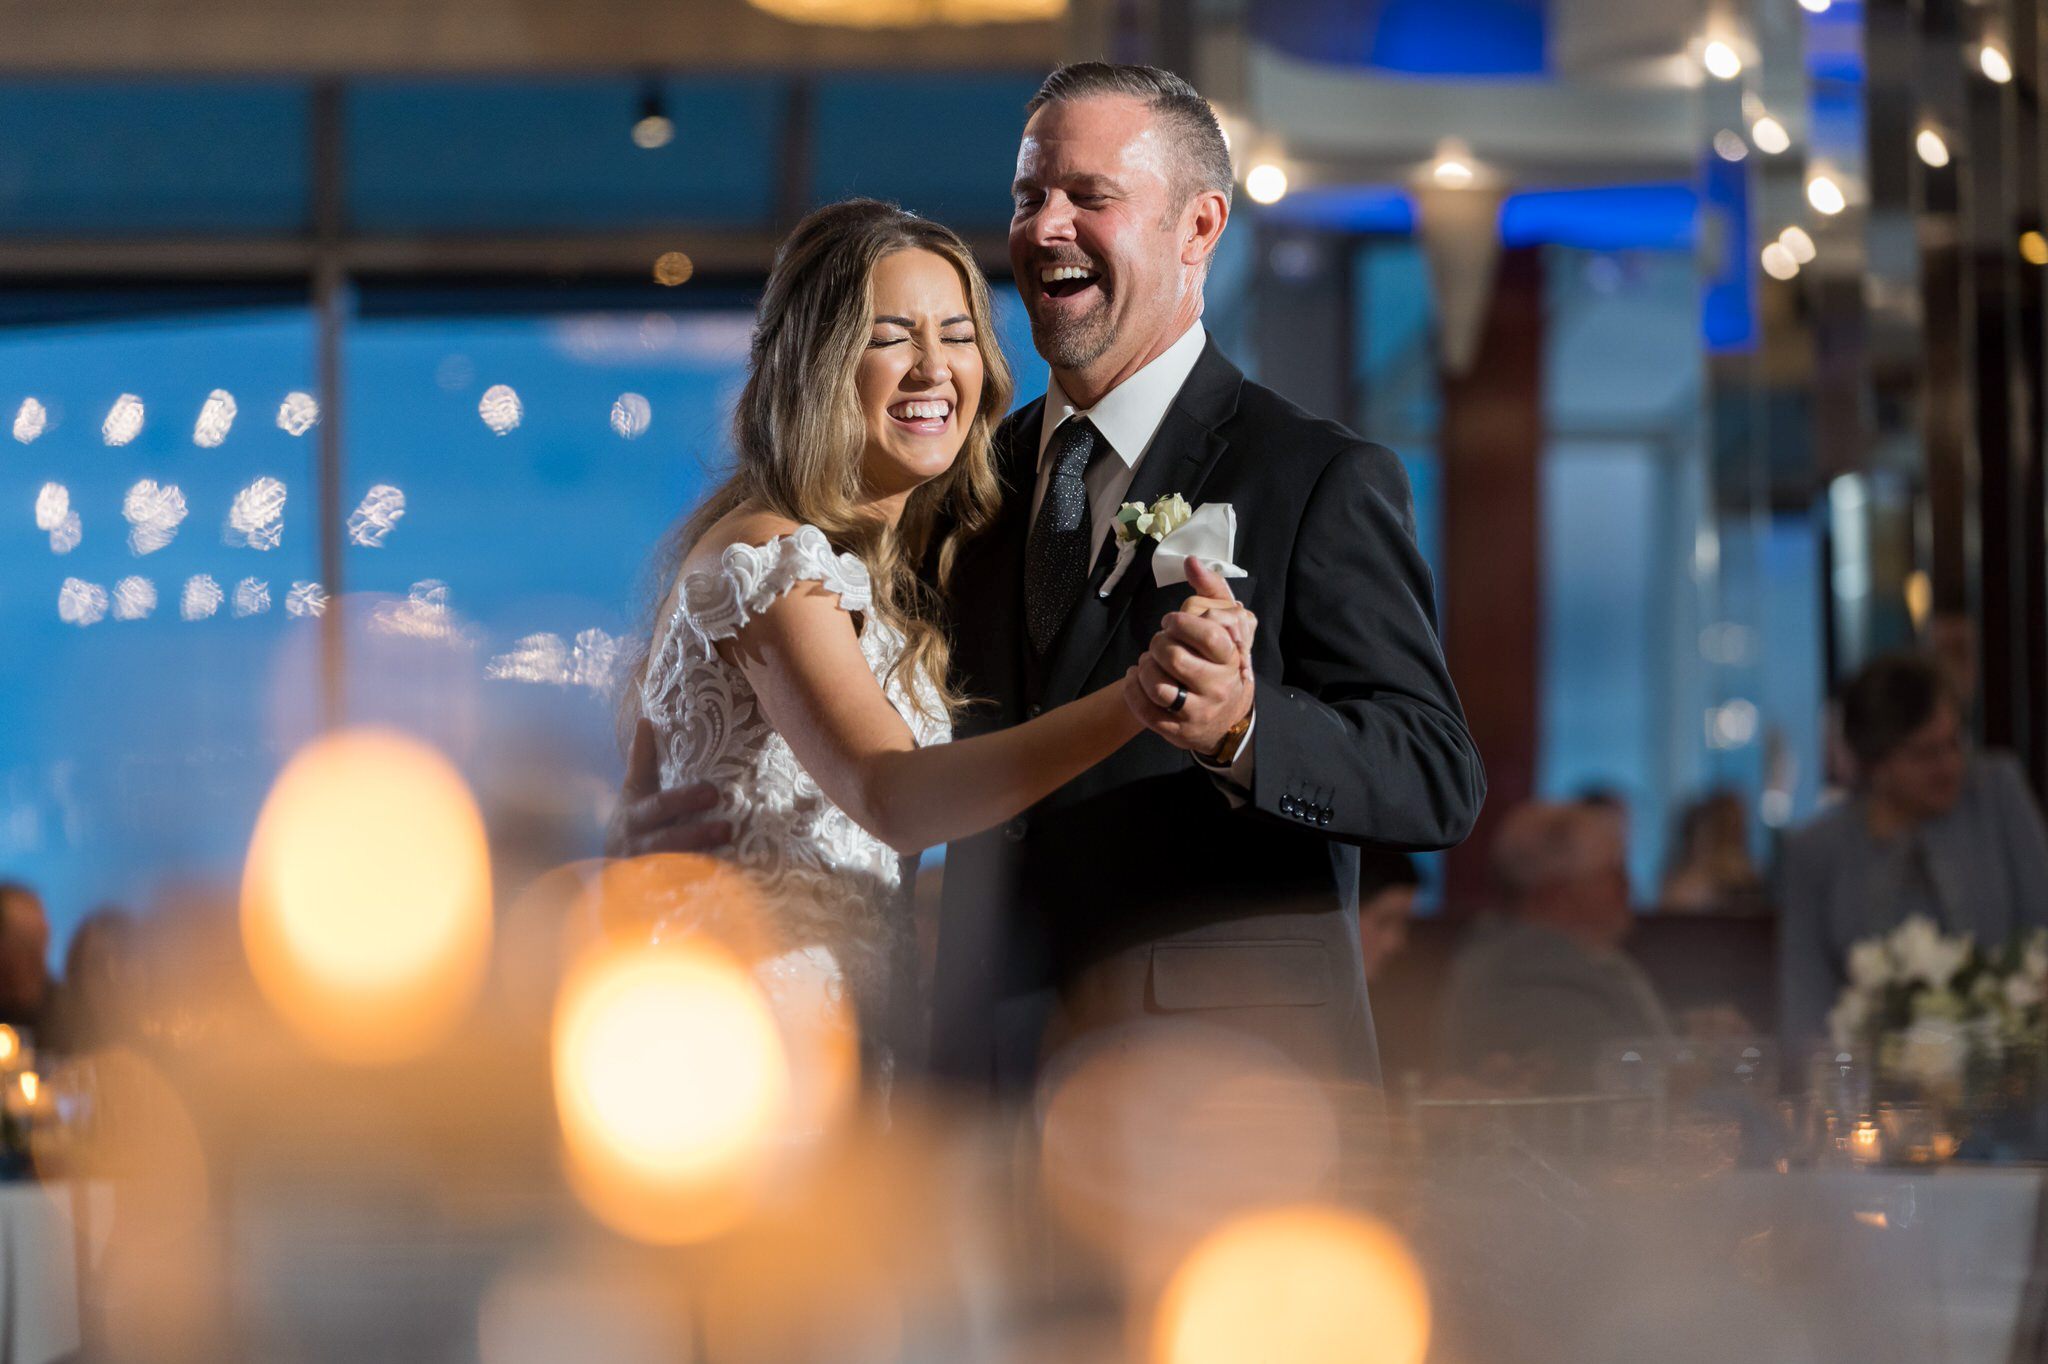 Father of the bride dances with his daughter with candlelight in the foreground during MacRay Harbor wedding reception